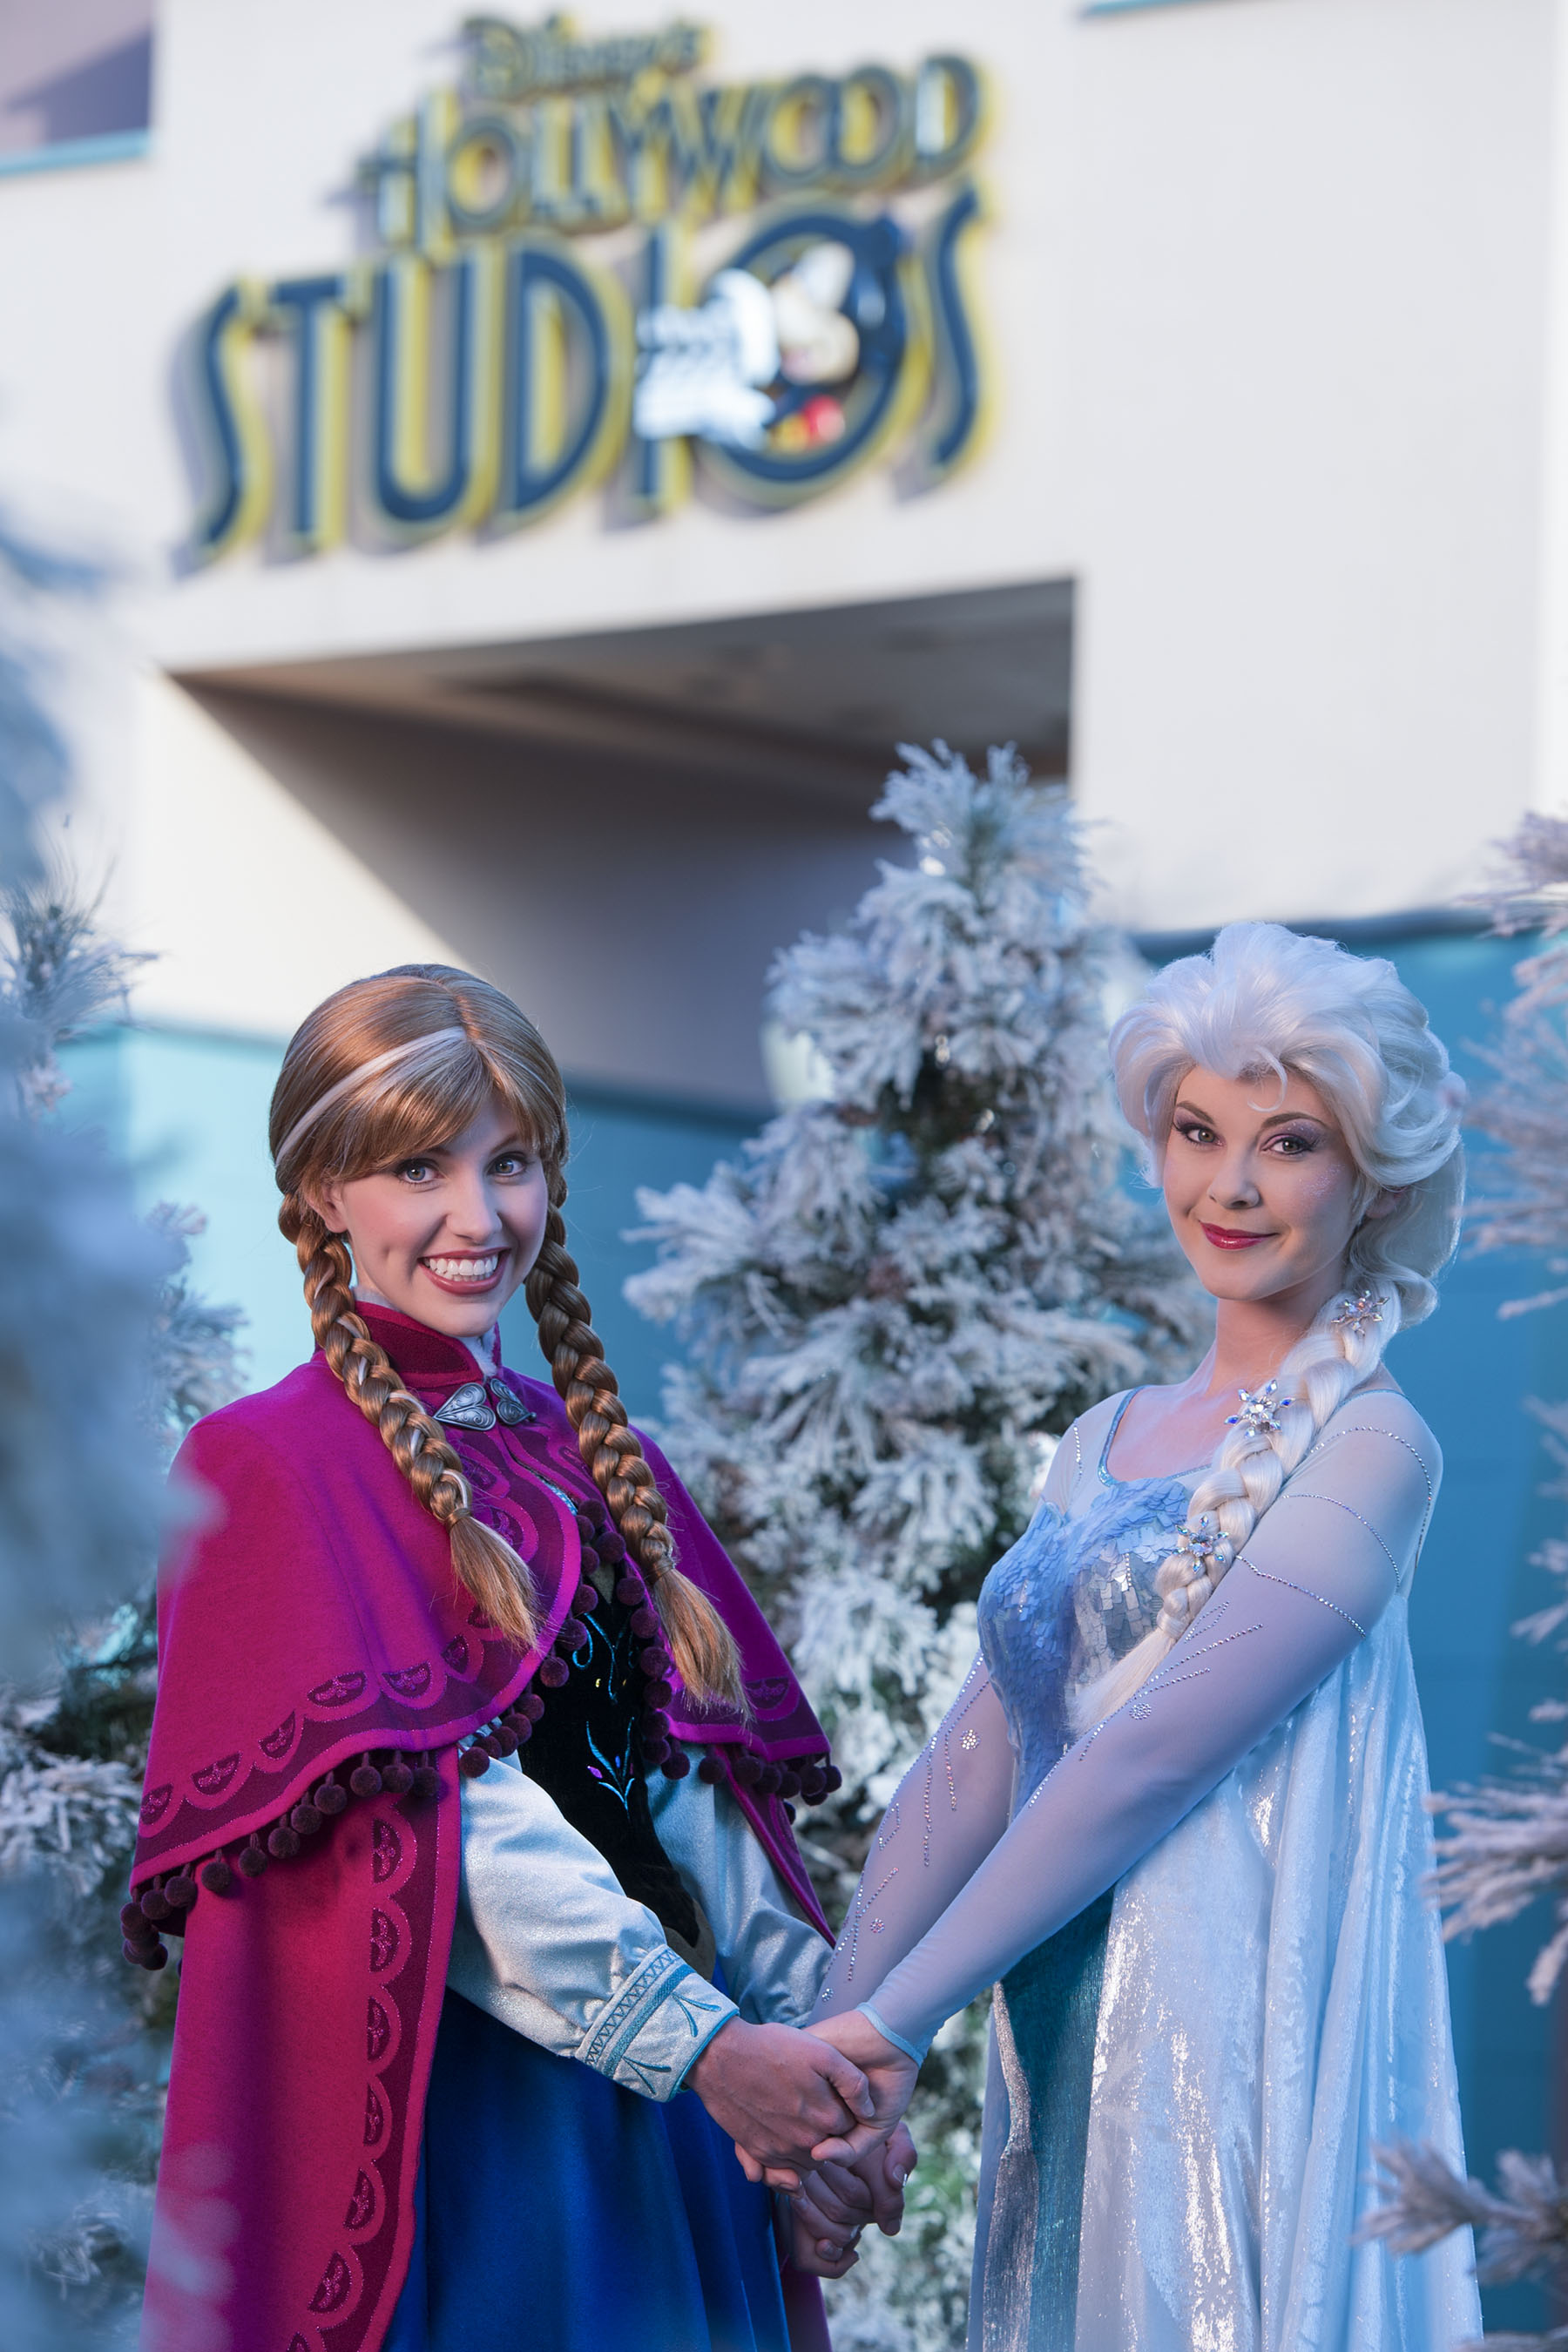 Get Ready for the “Frozen Summer Fun LIVE” Summer Event Coming to Hollywood Studios